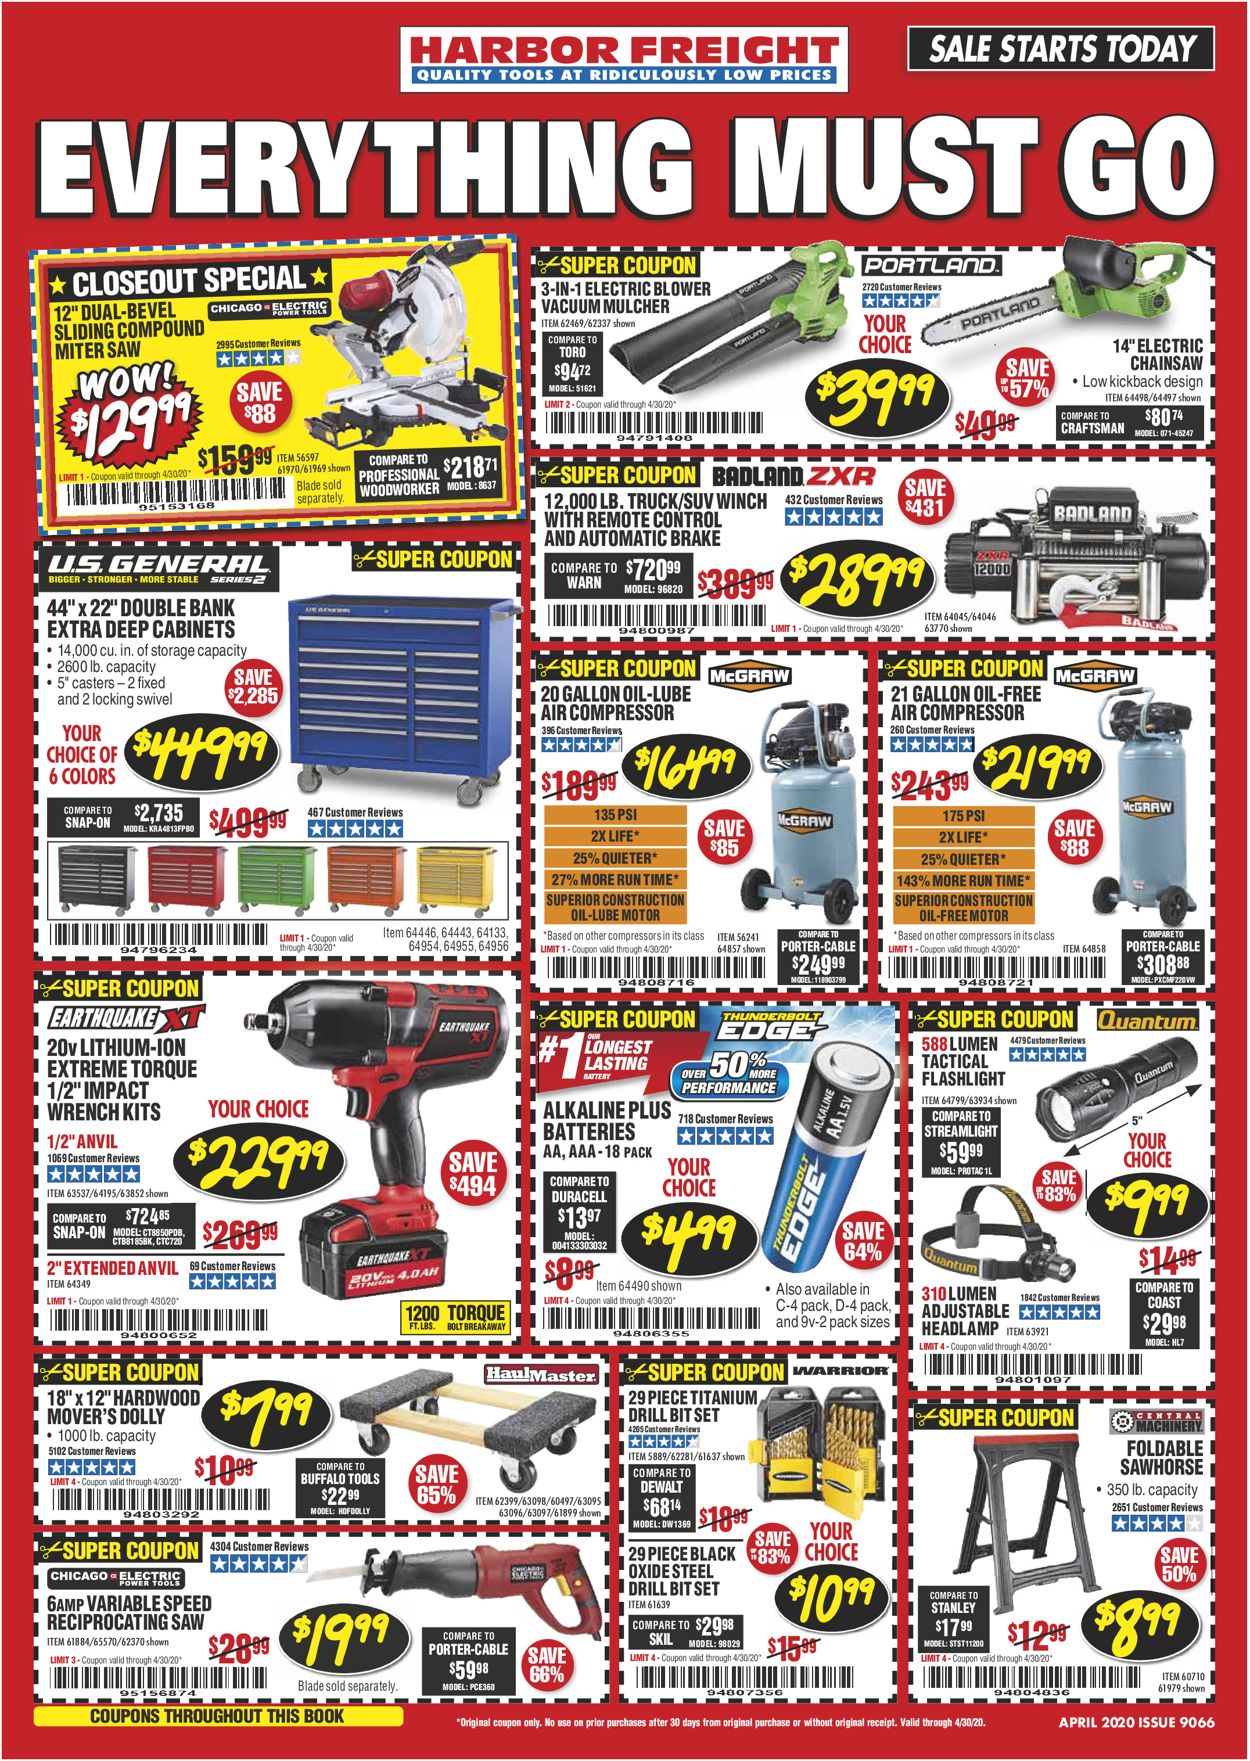 Harbor Freight Current weekly ad 04/01 04/30/2020